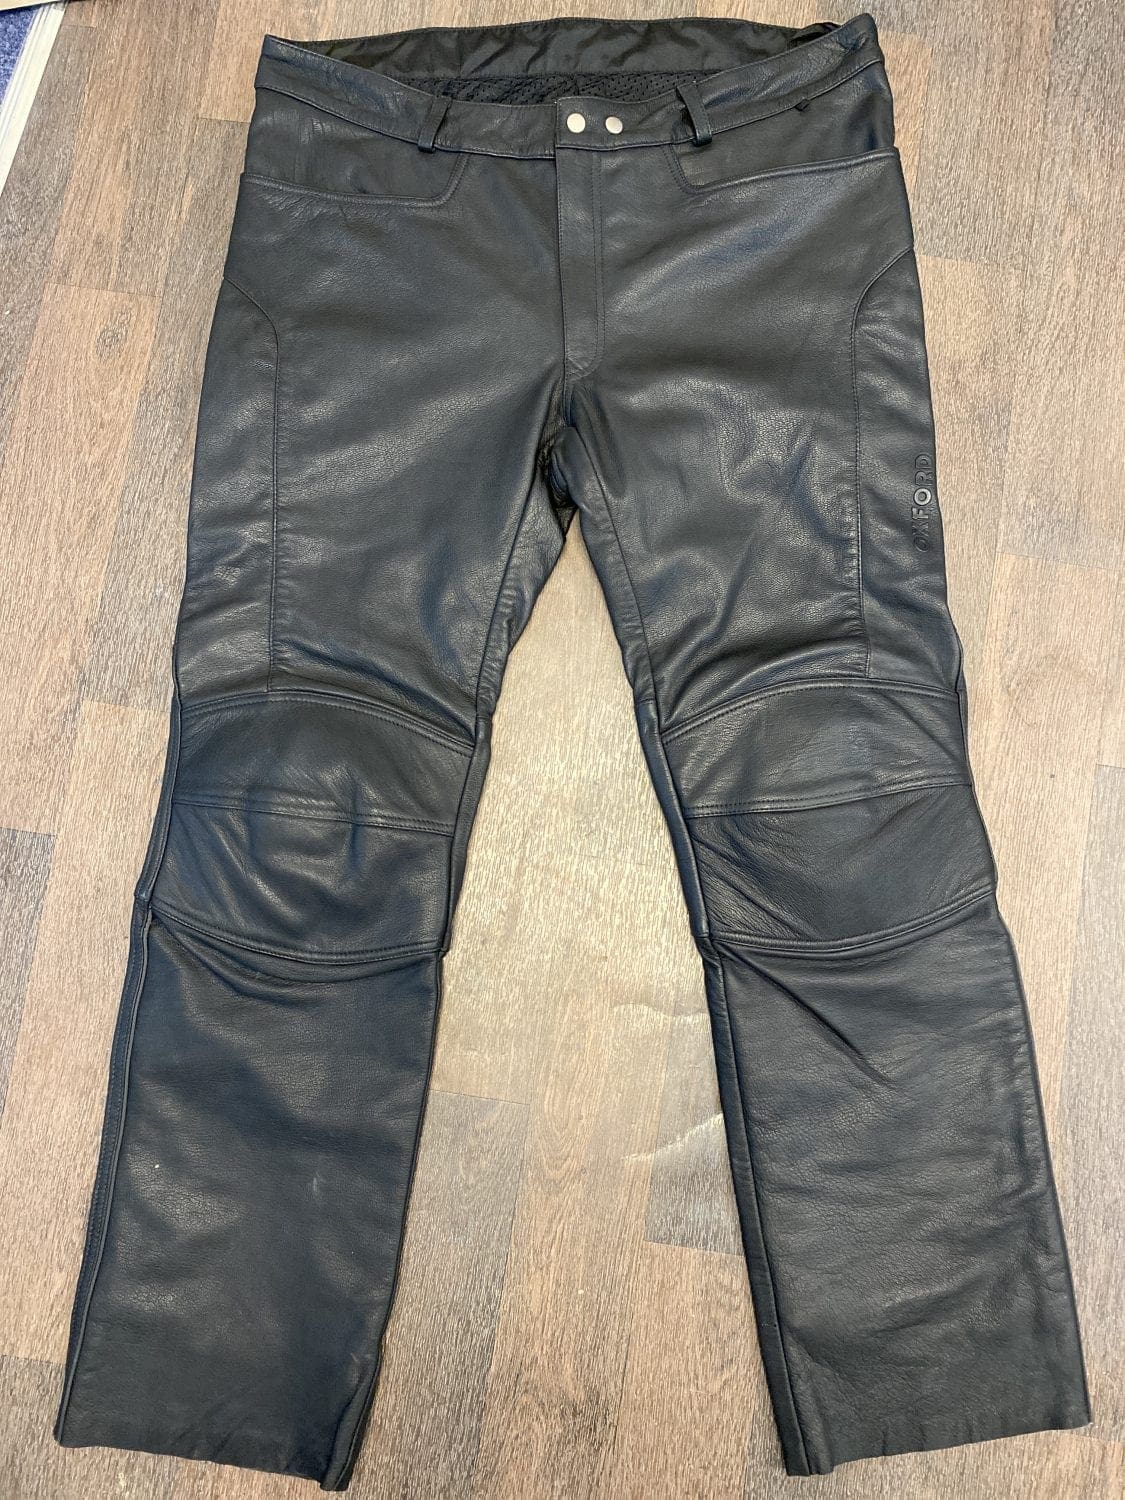 Route 73 Oxford Leather Motorcycle Pant - Boat Scrapyard